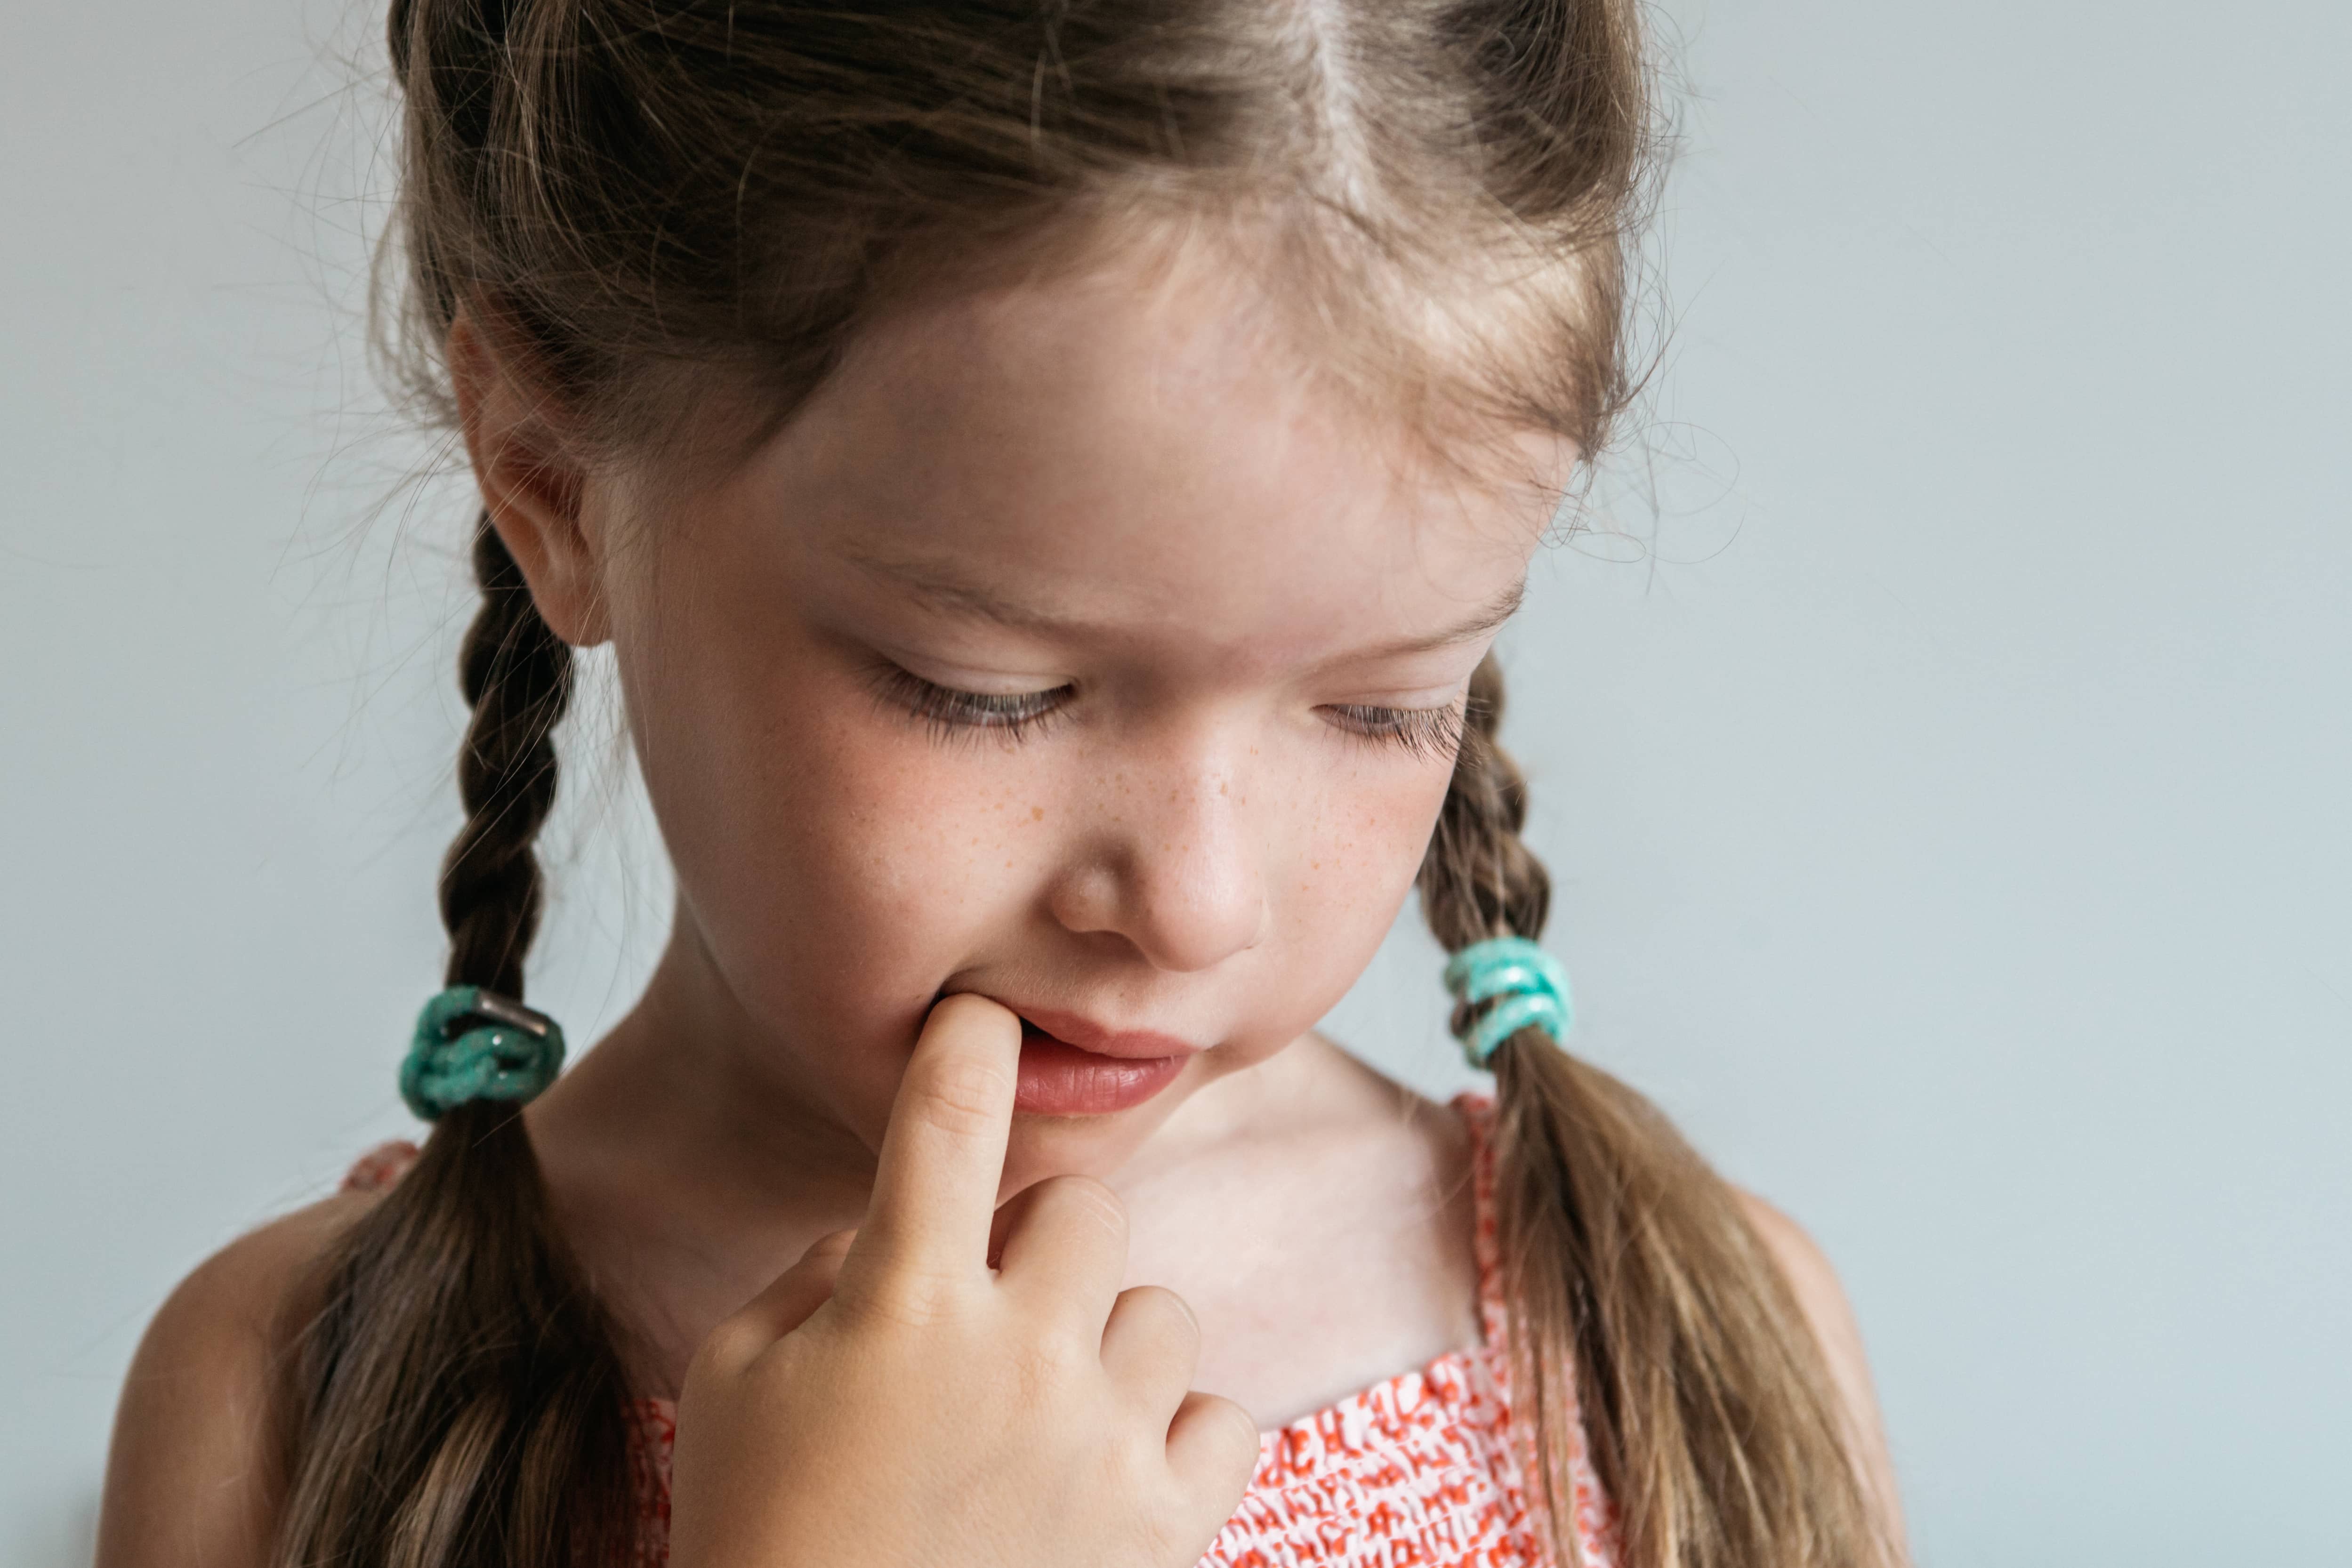 Biting Your Nails As A Child Wasn't Such A Bad Idea, Says Science